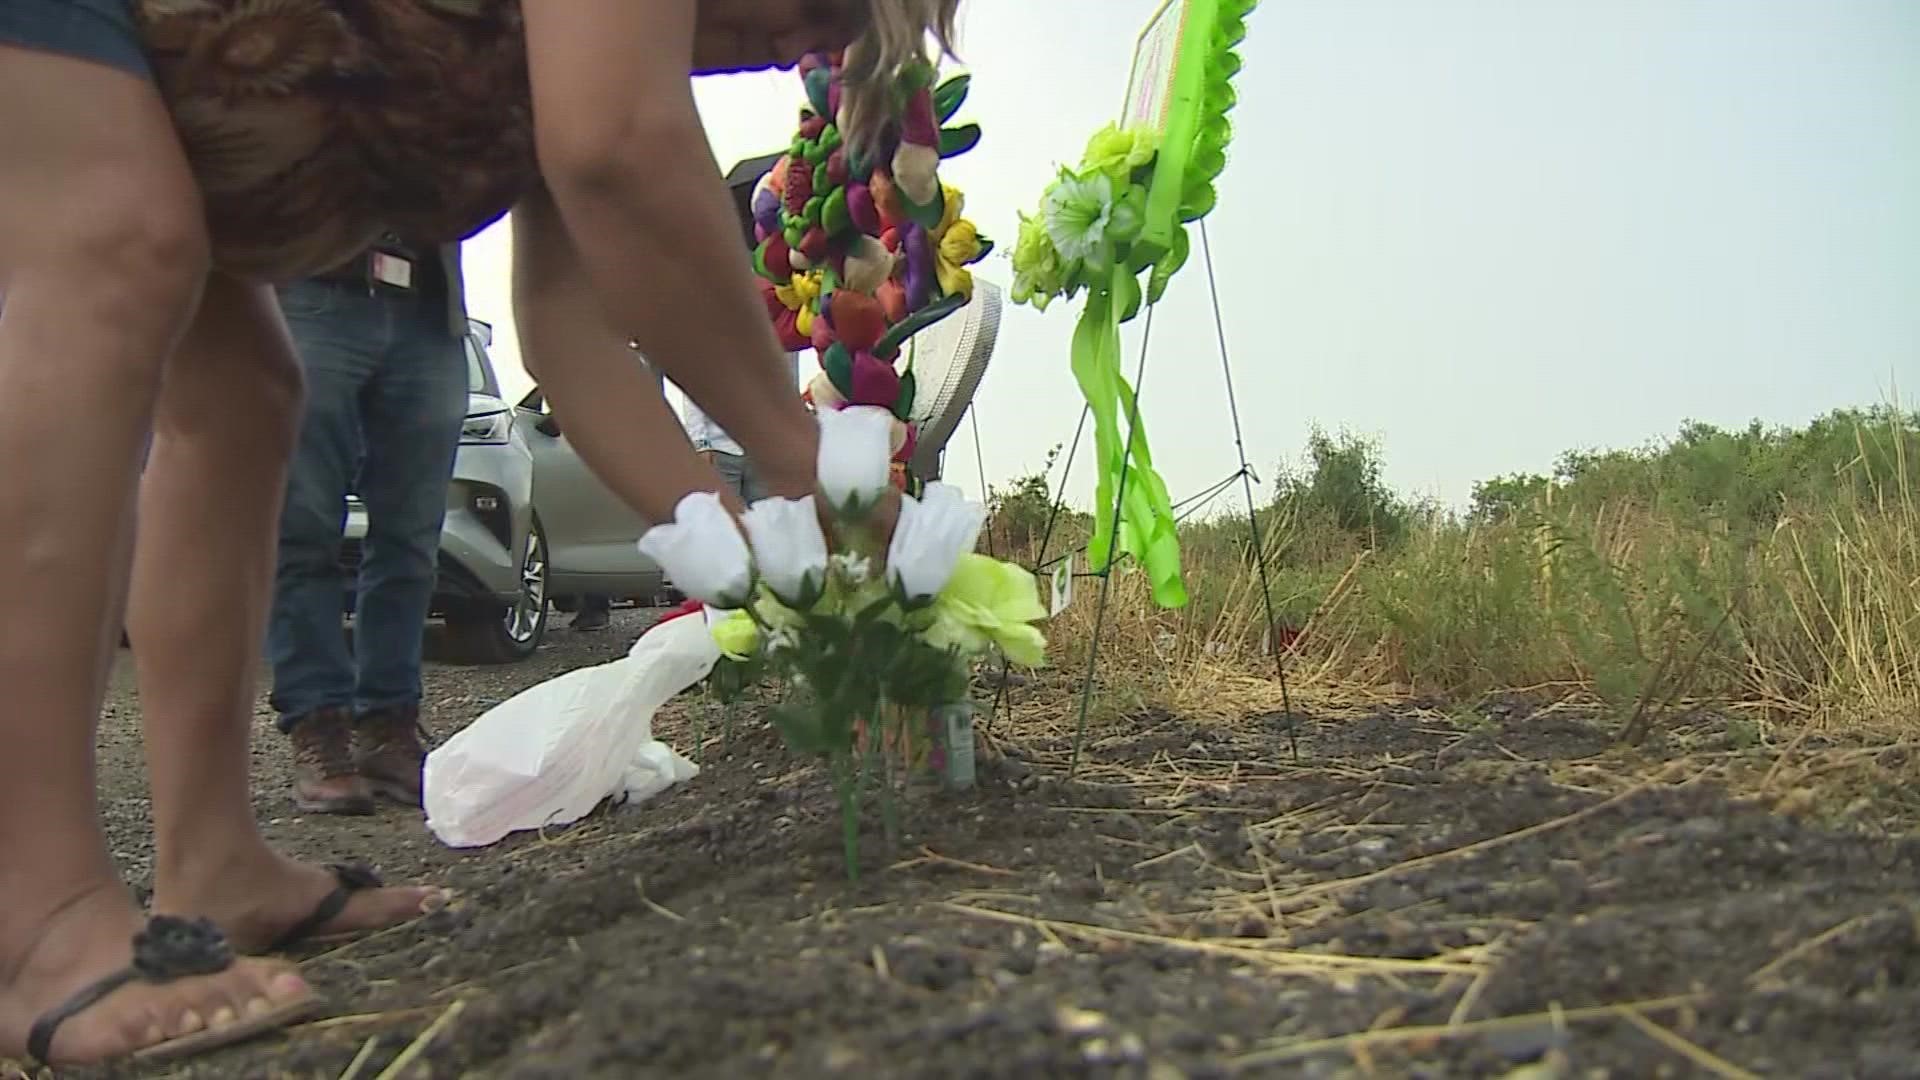 Crosses are being placed at the exact location the trailer was found along a desolate stretch of road in southwest San Antonio.